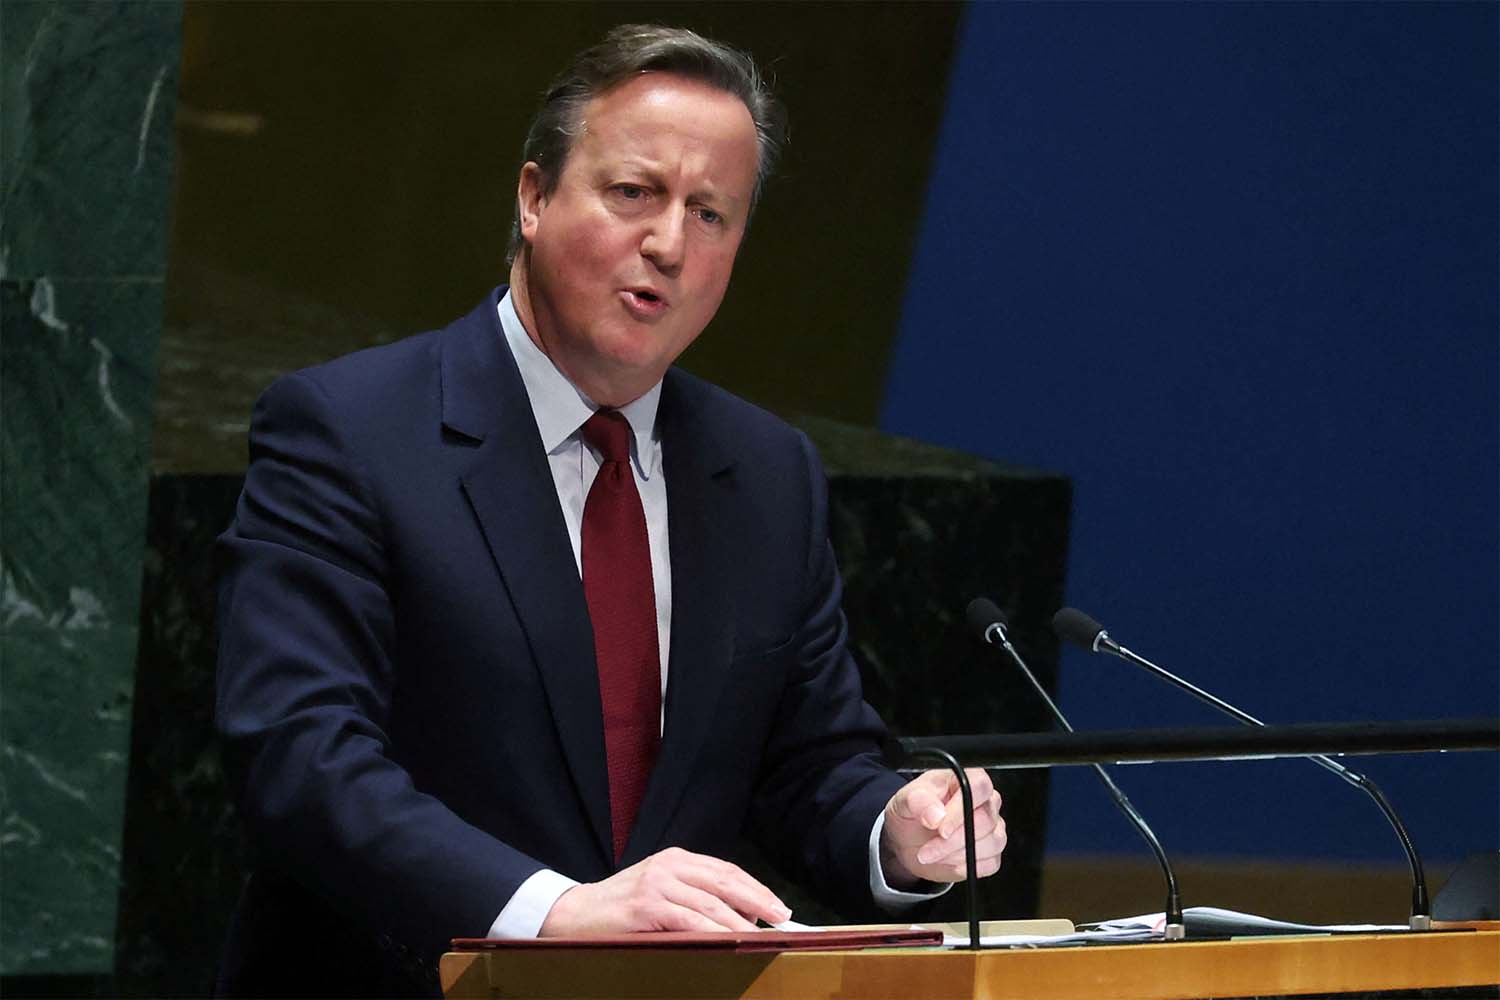 Cameron: People are dying of hunger; people are dying of otherwise preventable diseases